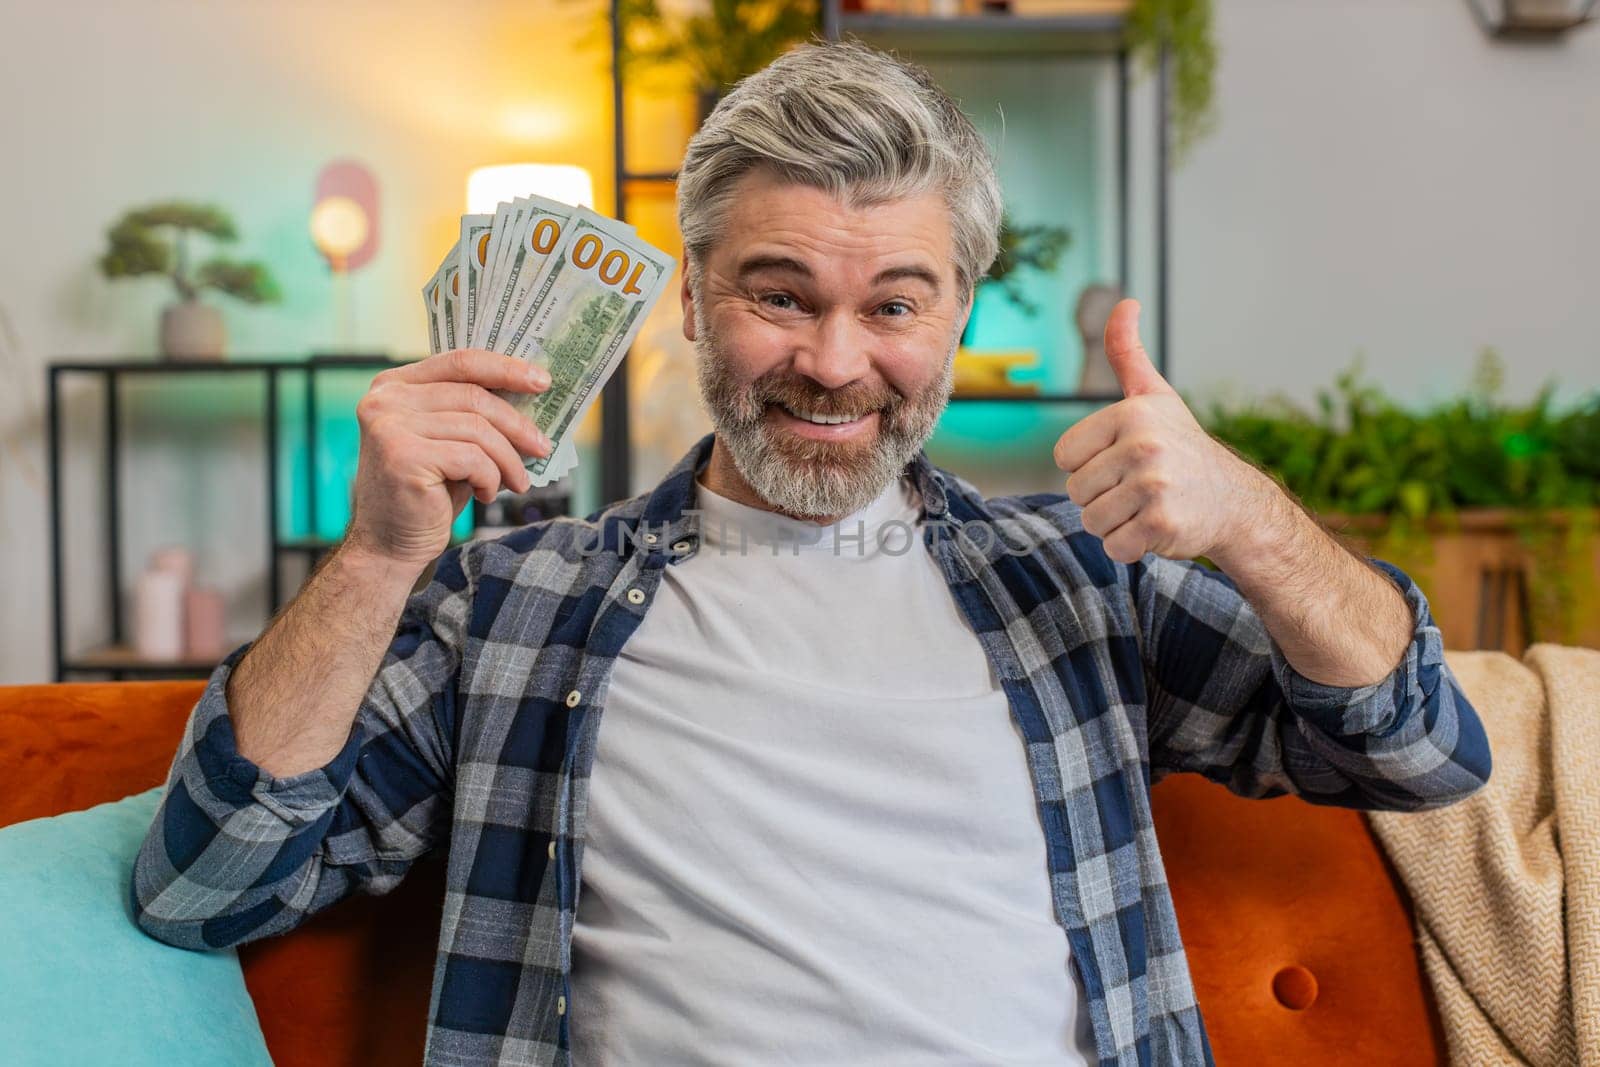 Amazed middle-aged man showing pointing money dollar cash bills clenching fist thumbs up at home by efuror